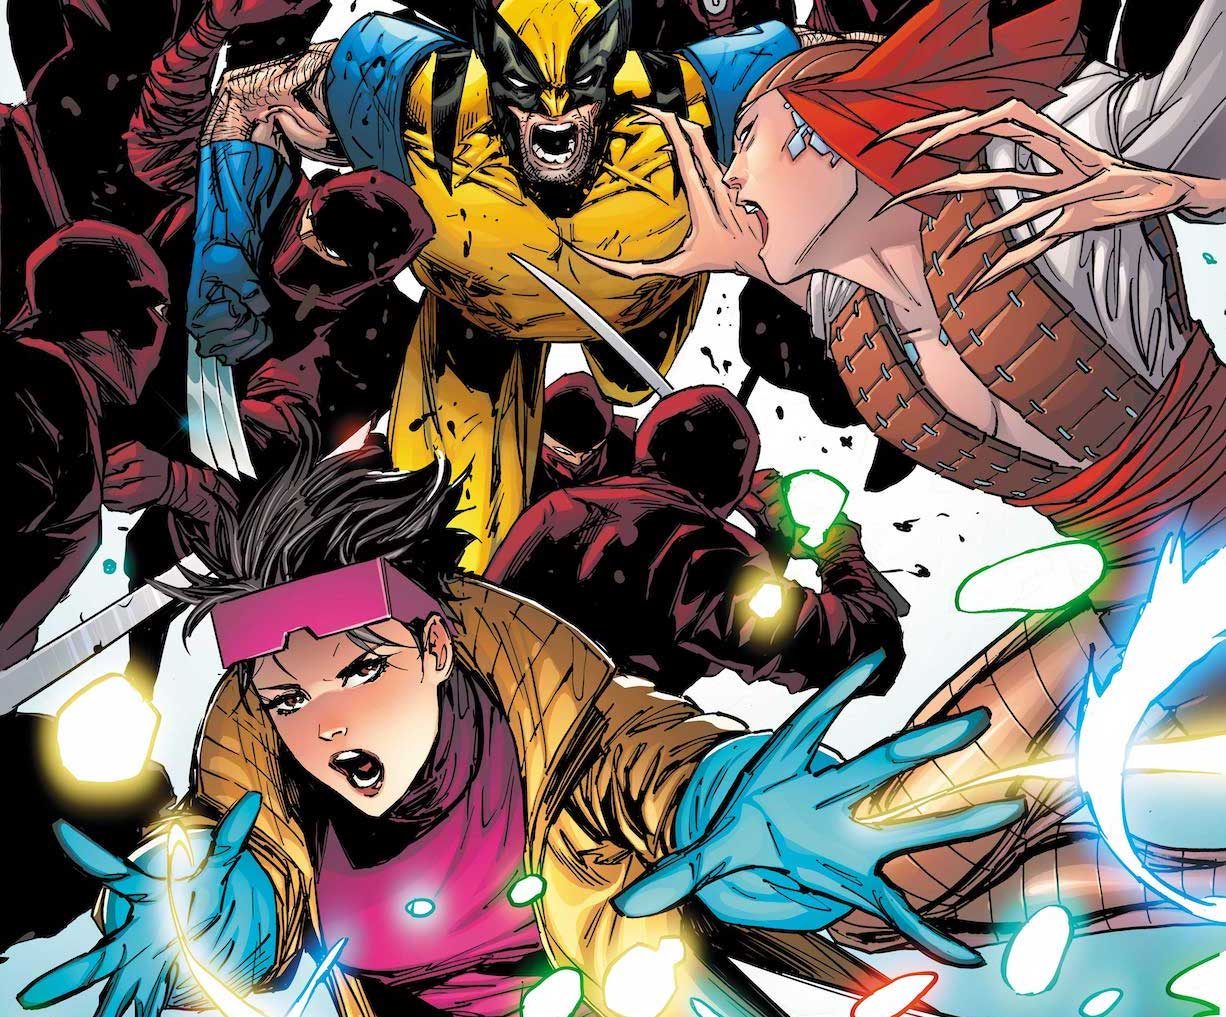 'X-Men: Legends' #7 to tell 90s Wolverine and Jubilee story